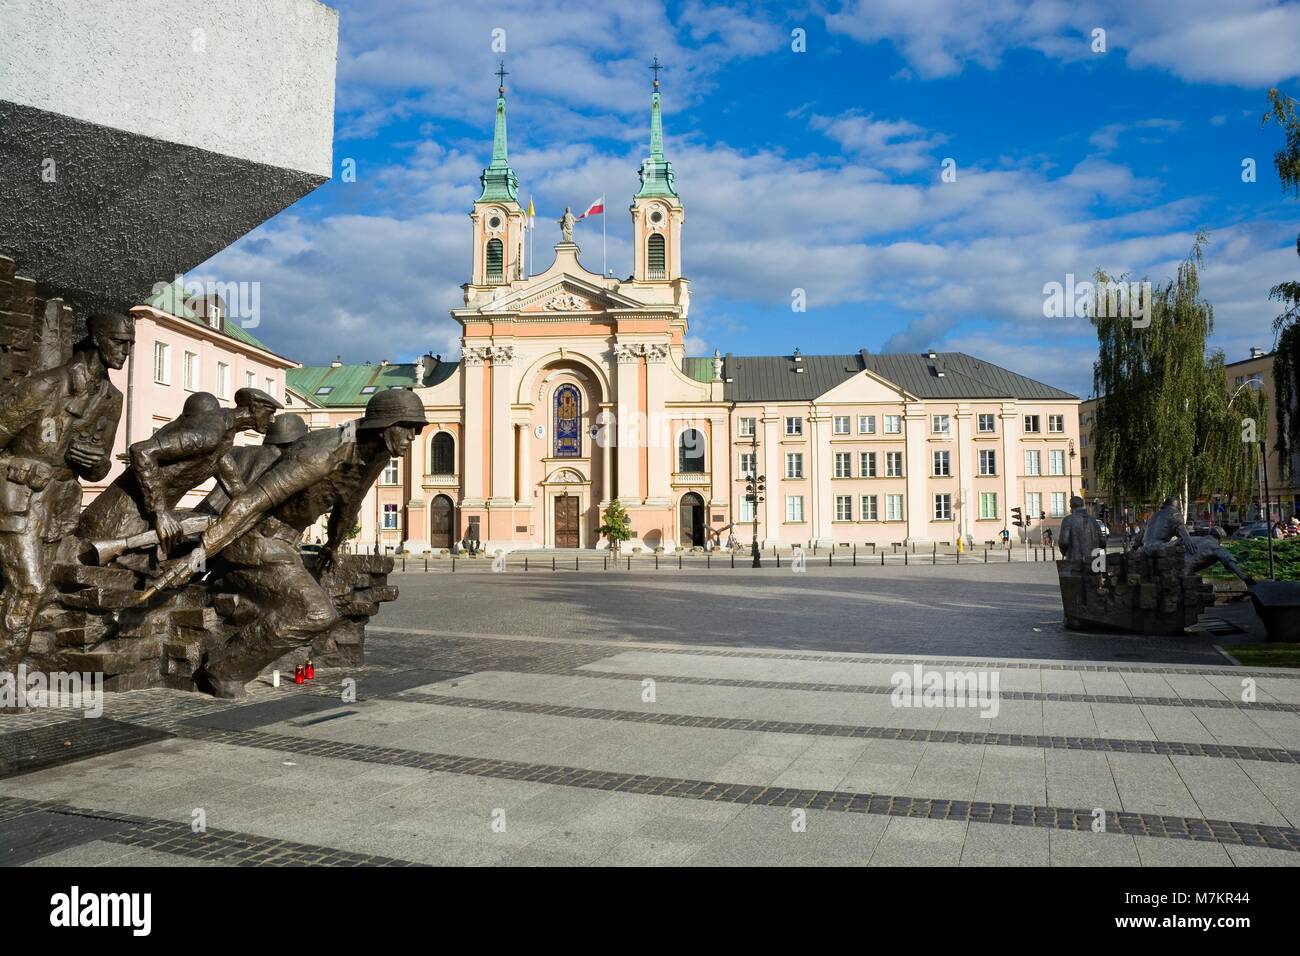 WARSAW, POLAND - AUGUST 24: Composed of two parts Warsaw Uprising Monument on Krasinski Square, the Field Cathedral of the Polish Army in the backgrou Stock Photo